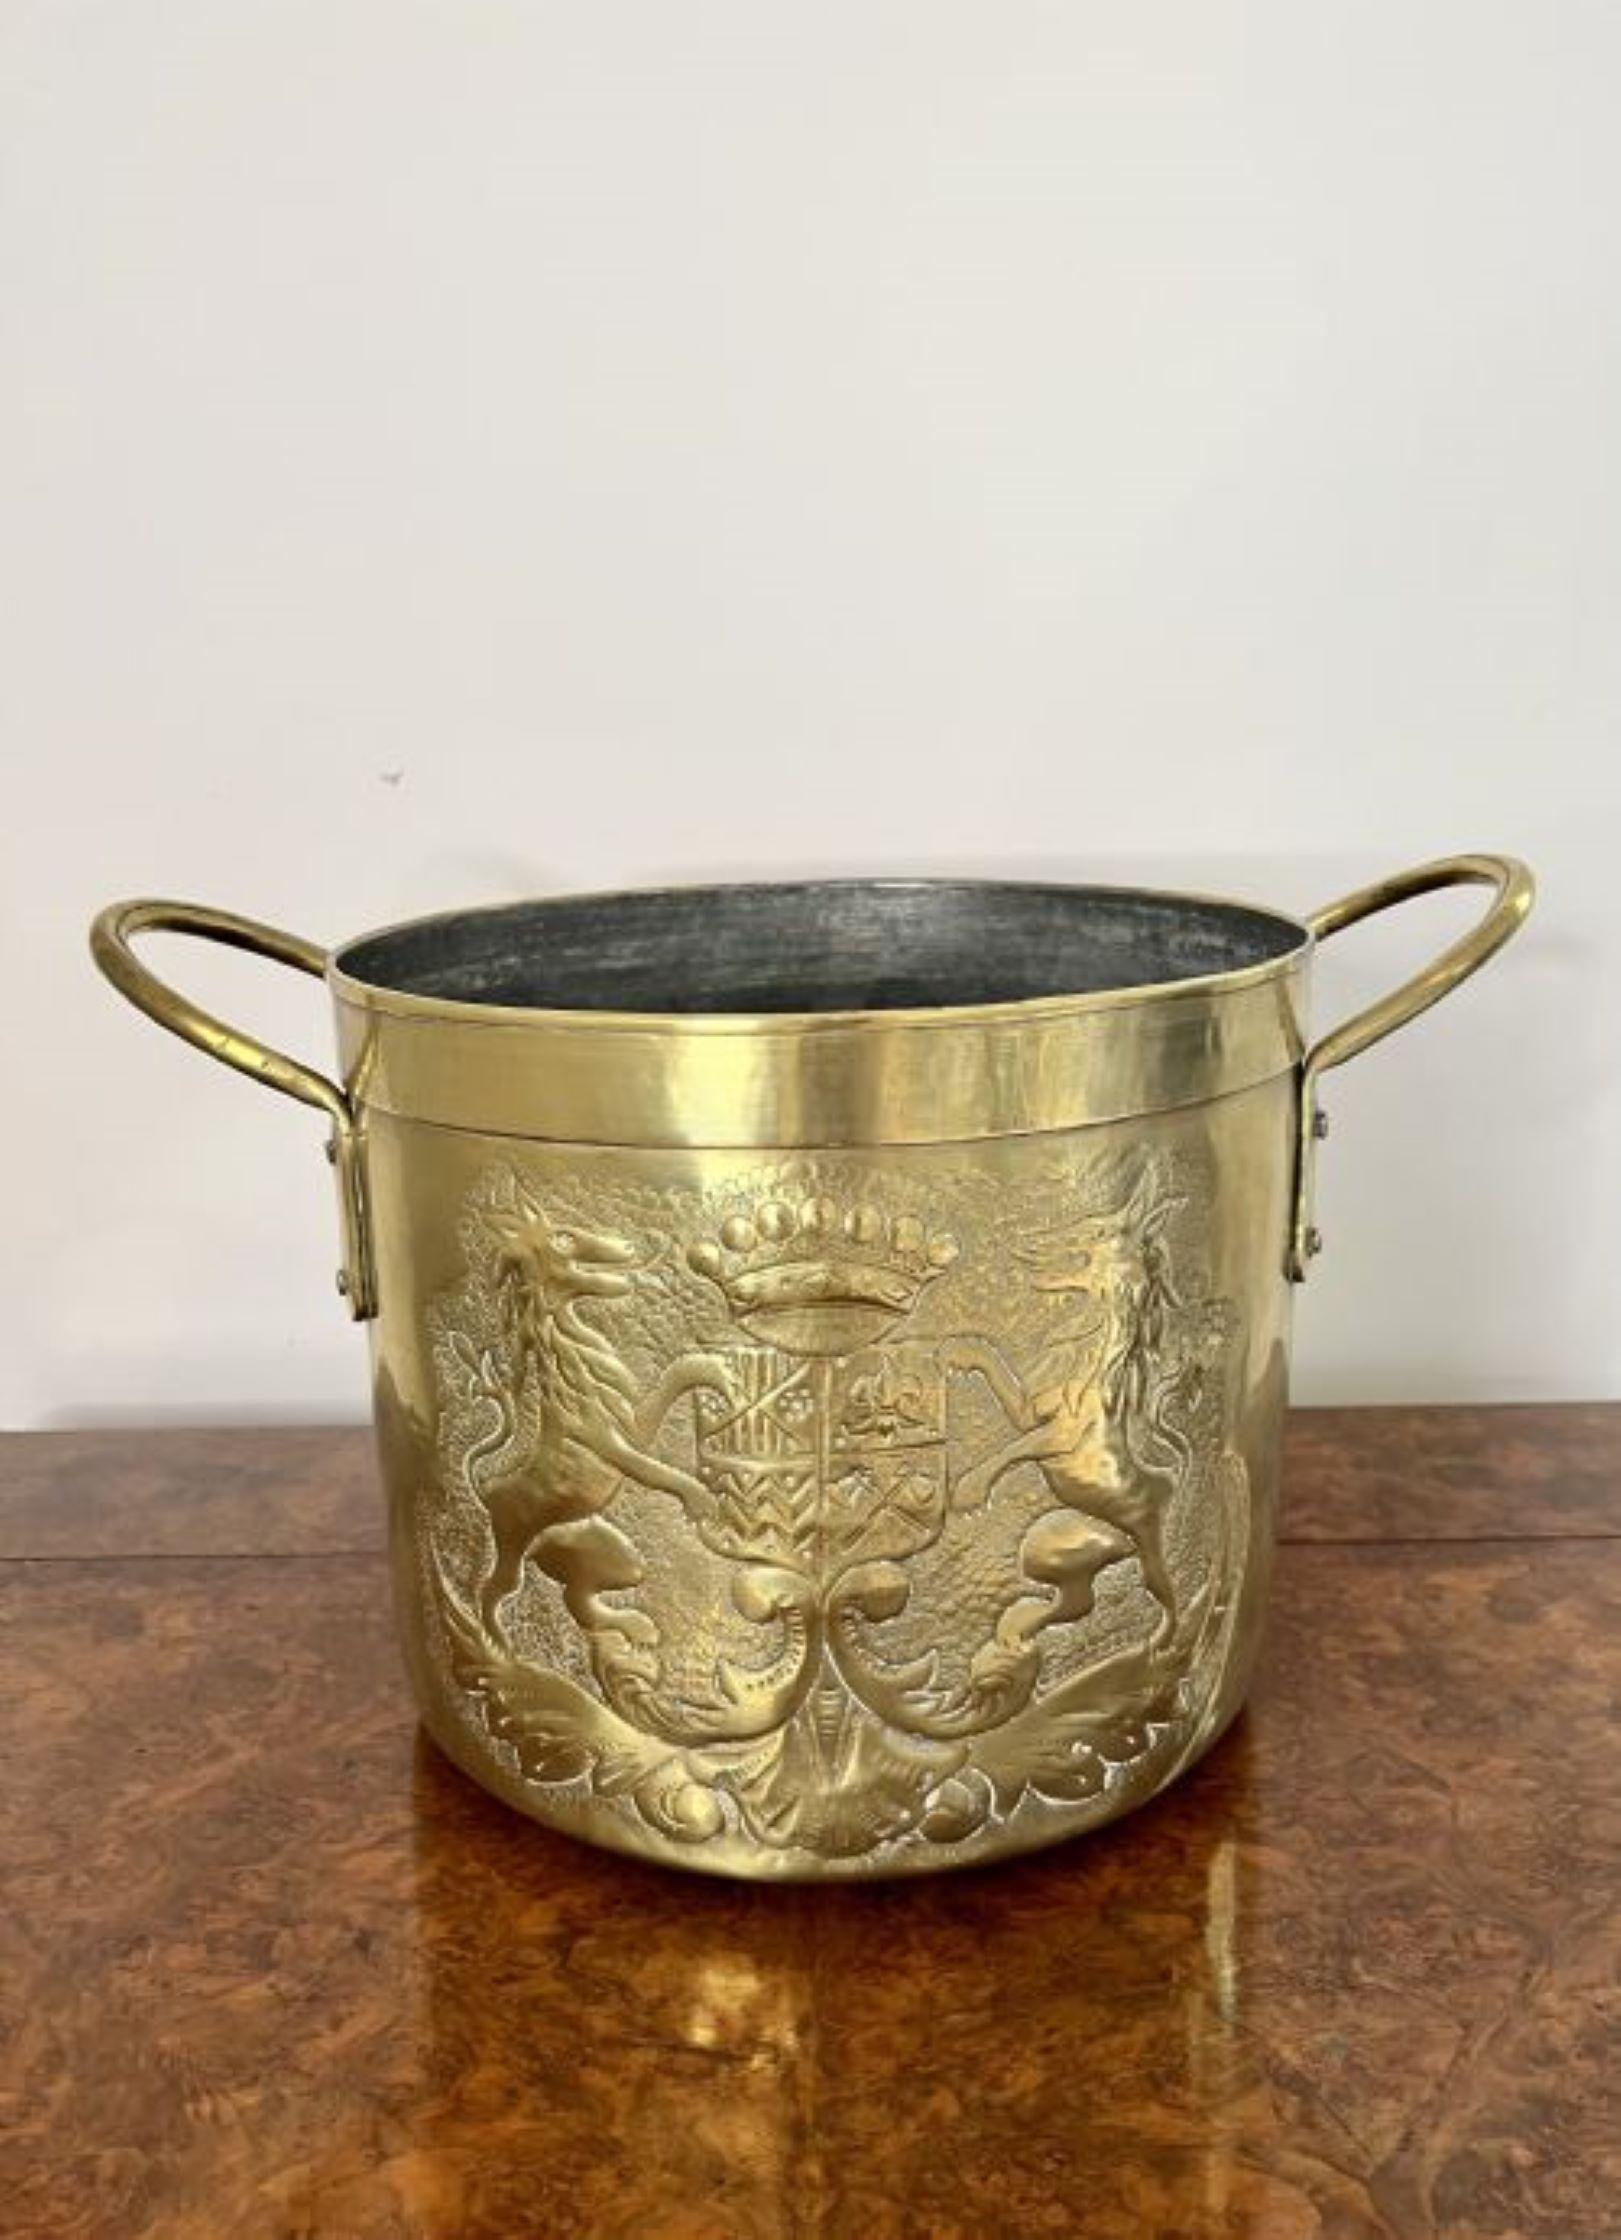 Quality antique Victorian circular brass coal bucket having a quality antique Victorian brass coal bucket decorated to the front with the coat of arms, with two handles to the sides and circular in shape.